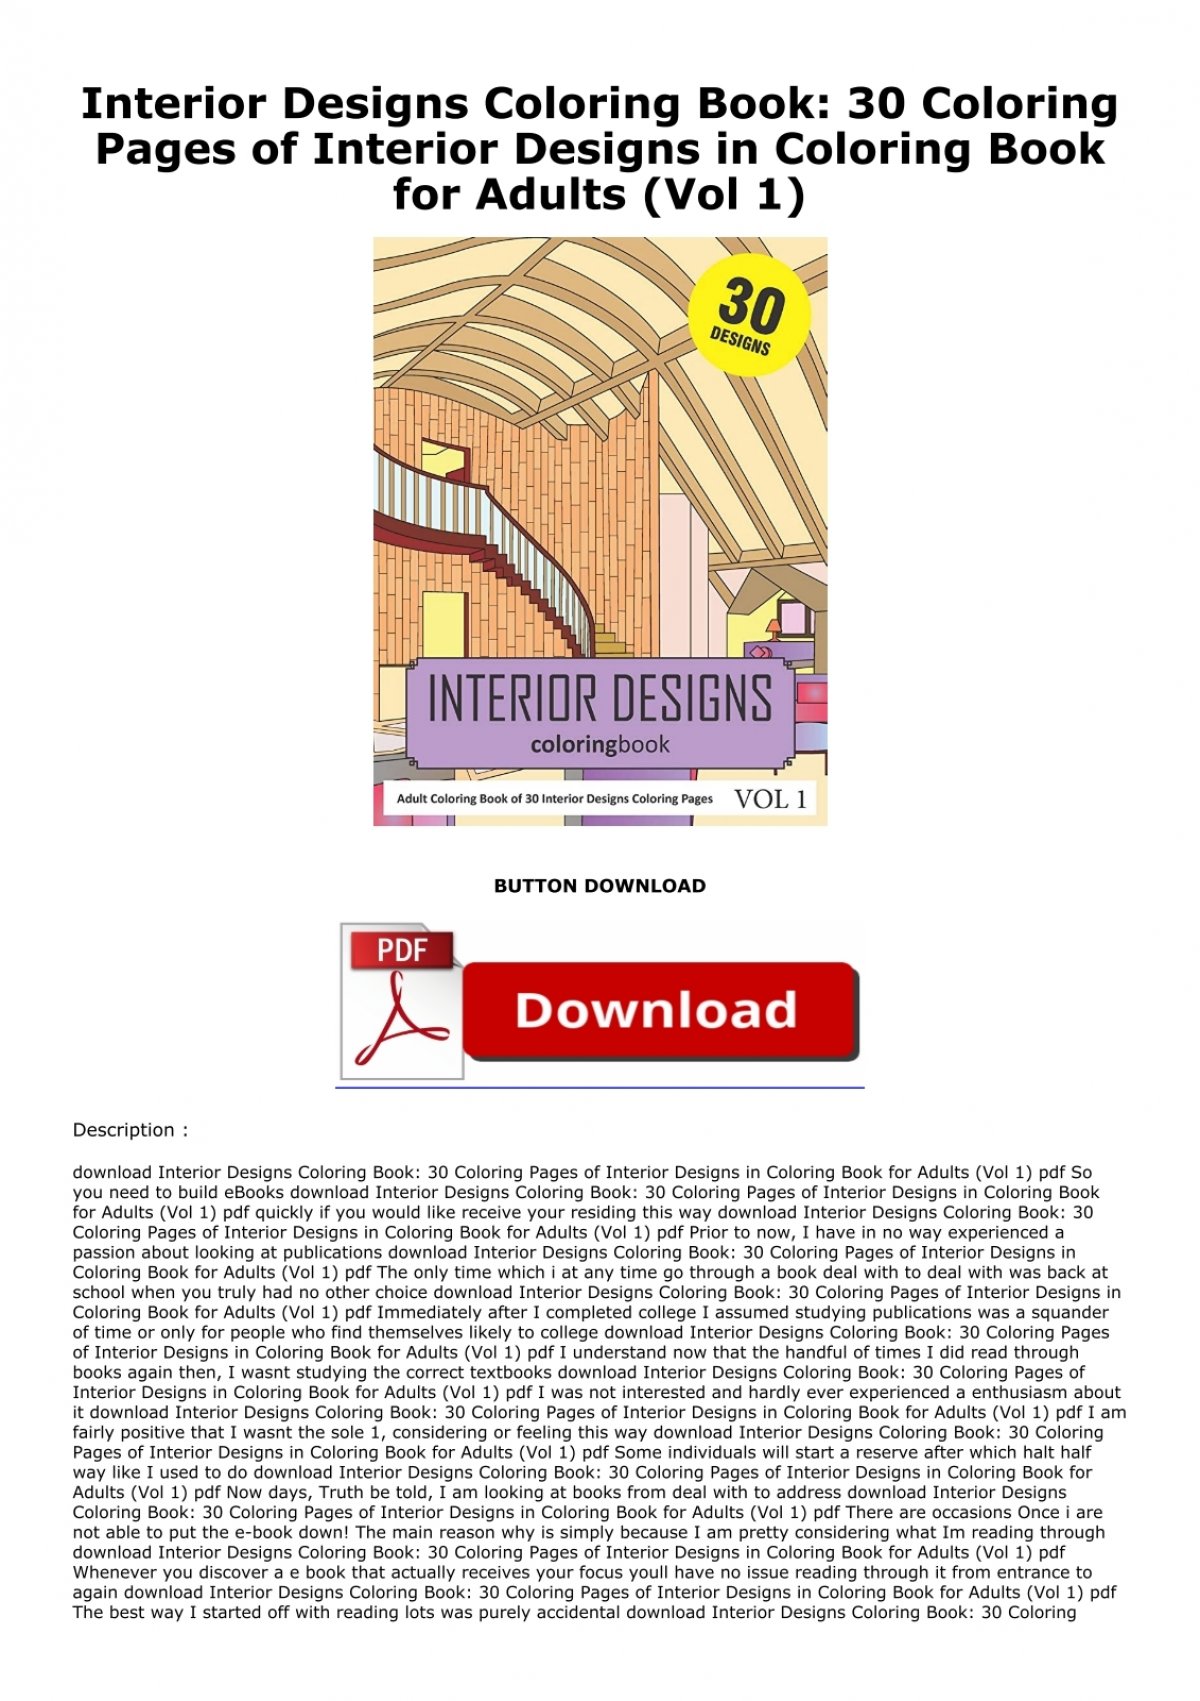 Download Pdf Download Interior Designs Coloring Book 30 Coloring Pages Of Interior Designs In Coloring Book For Adults Vol 1 Full